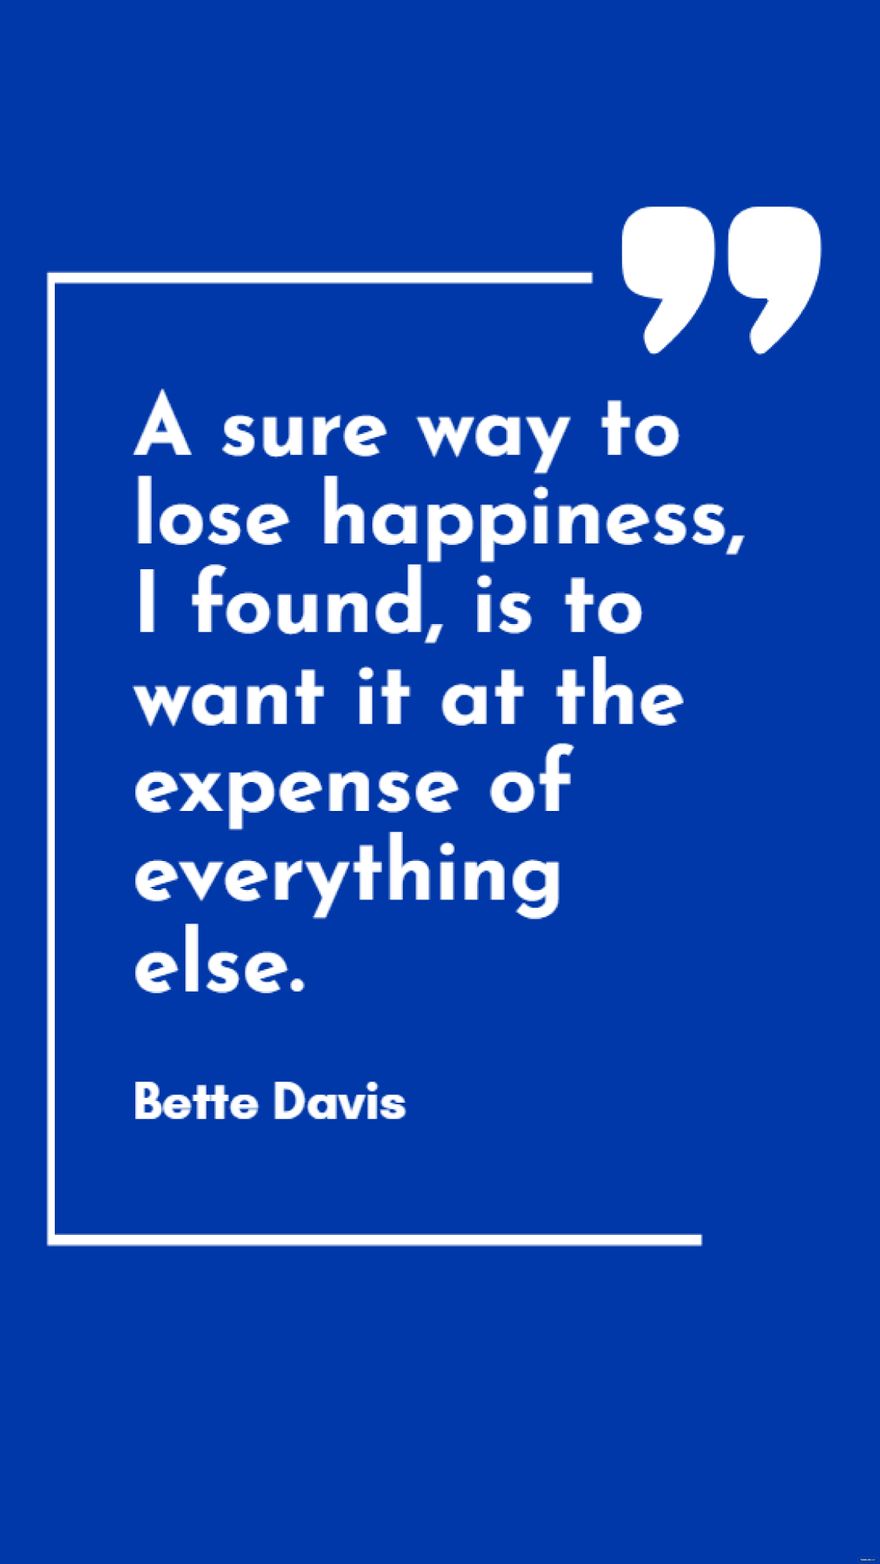 Free Bette Davis - A sure way to lose happiness, I found, is to want it at the expense of everything else.